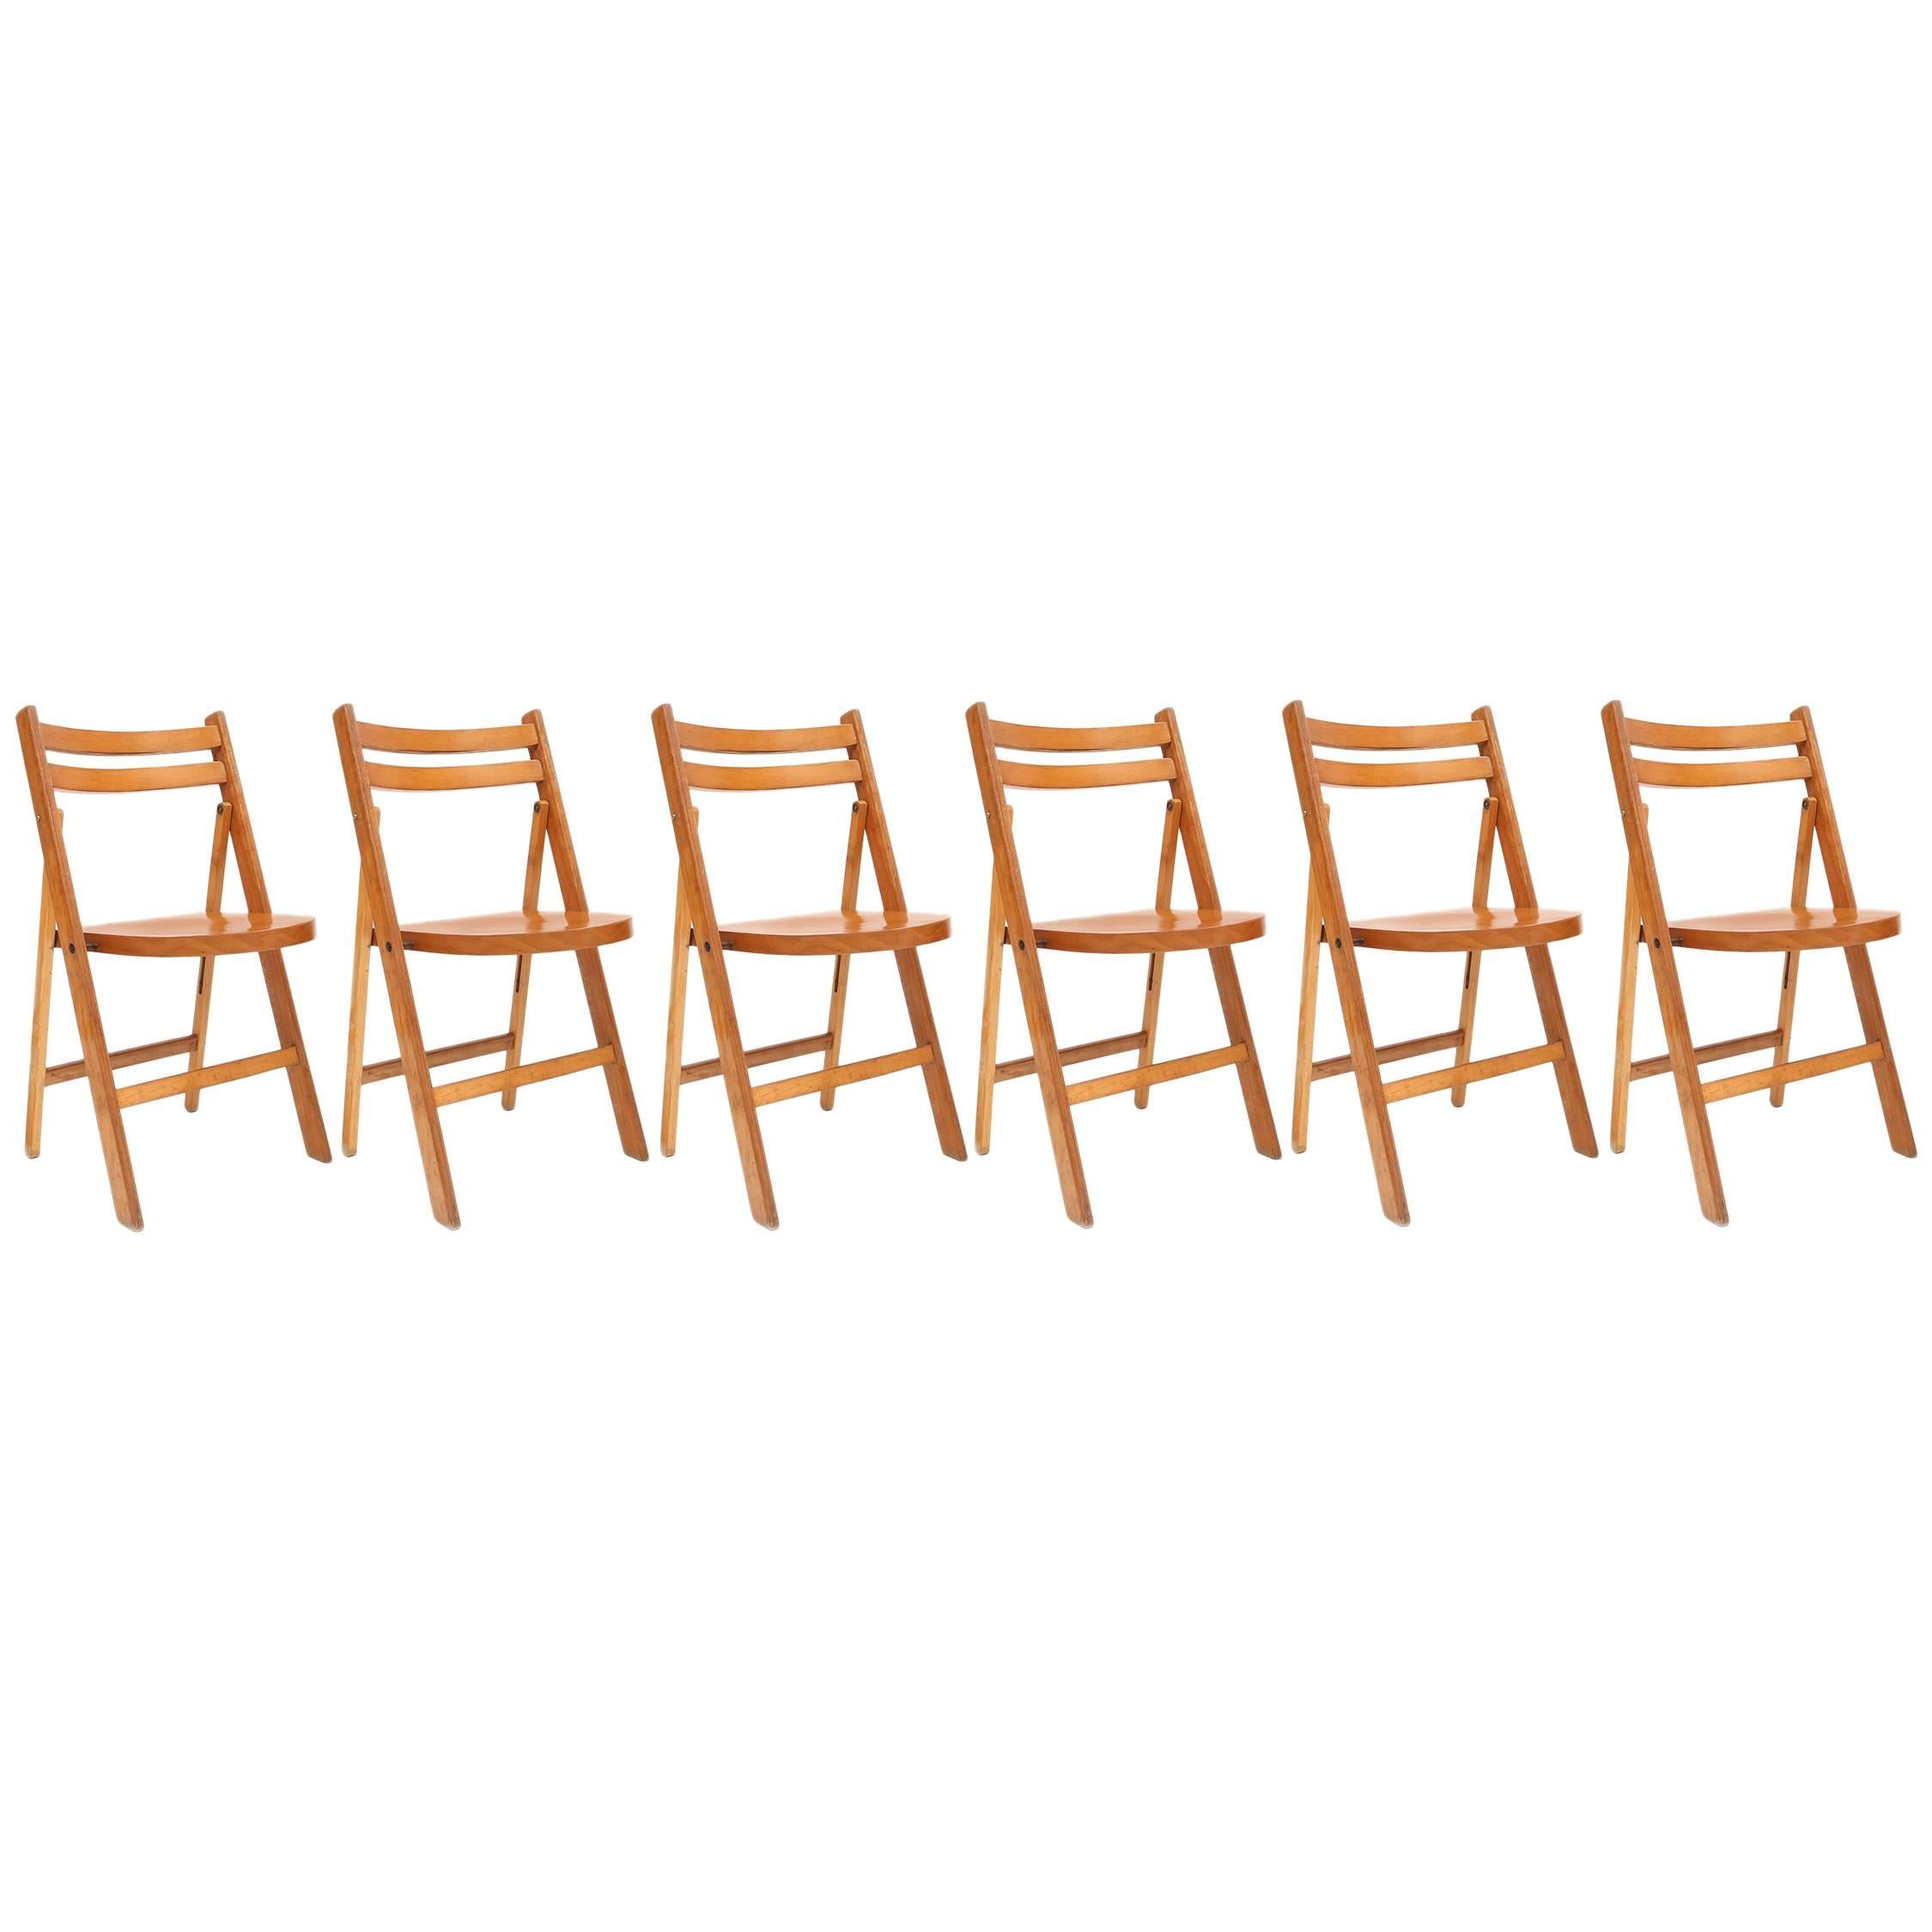 Mid-century modern vintage wooden stackable folding chairs